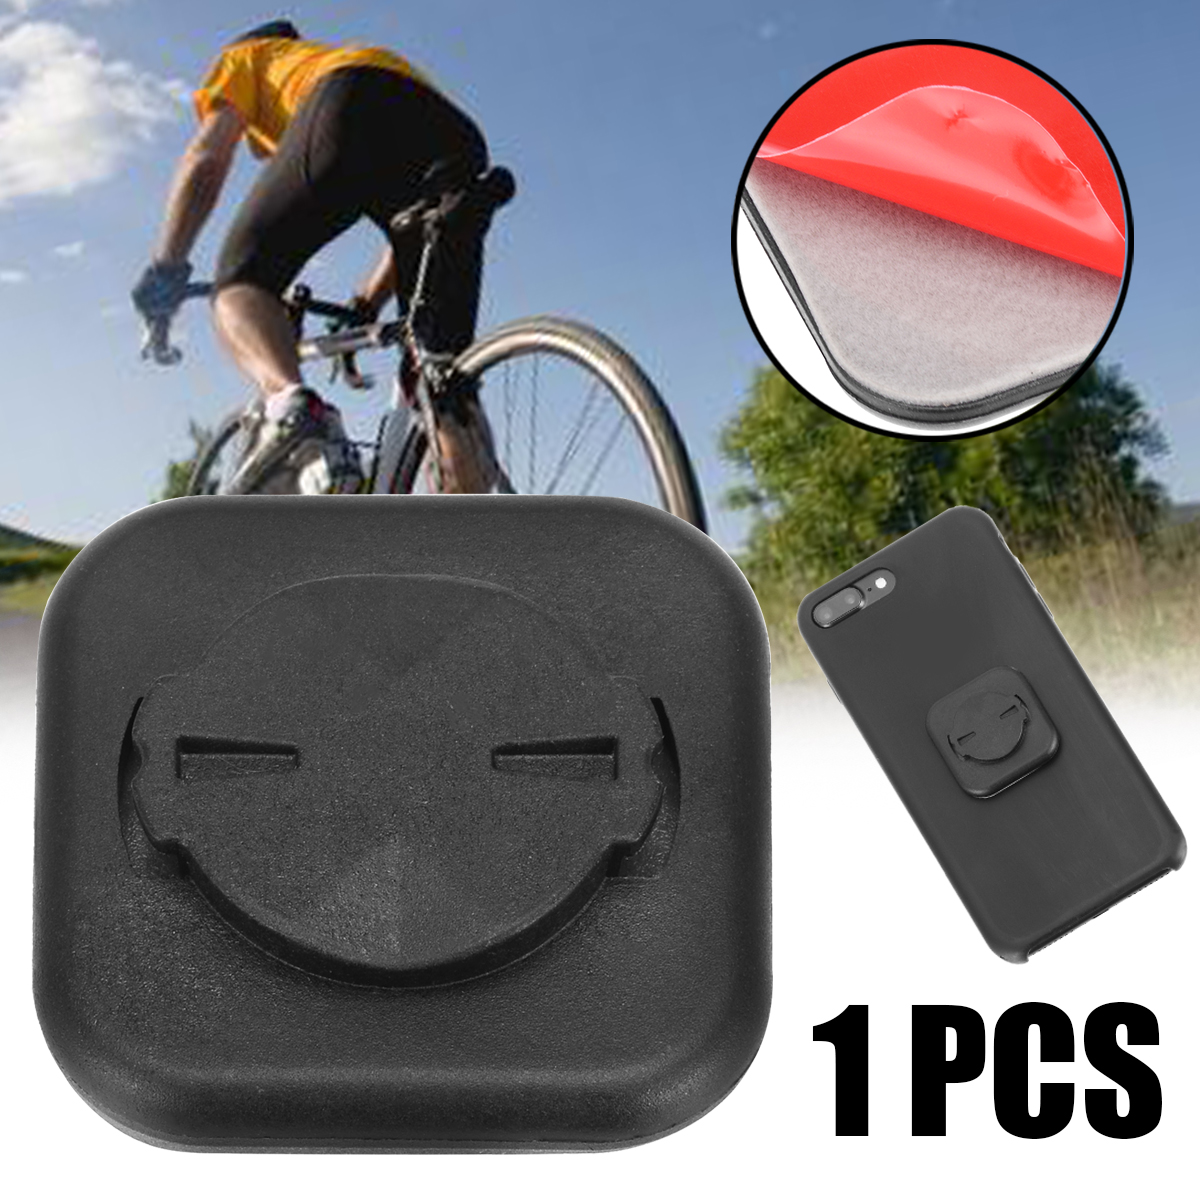 1Pcs Moutain Bicycle Stick Holder For Garmin Edge GPS Computer Mount Bracket Phone Stick Adapter Cycling Accessories